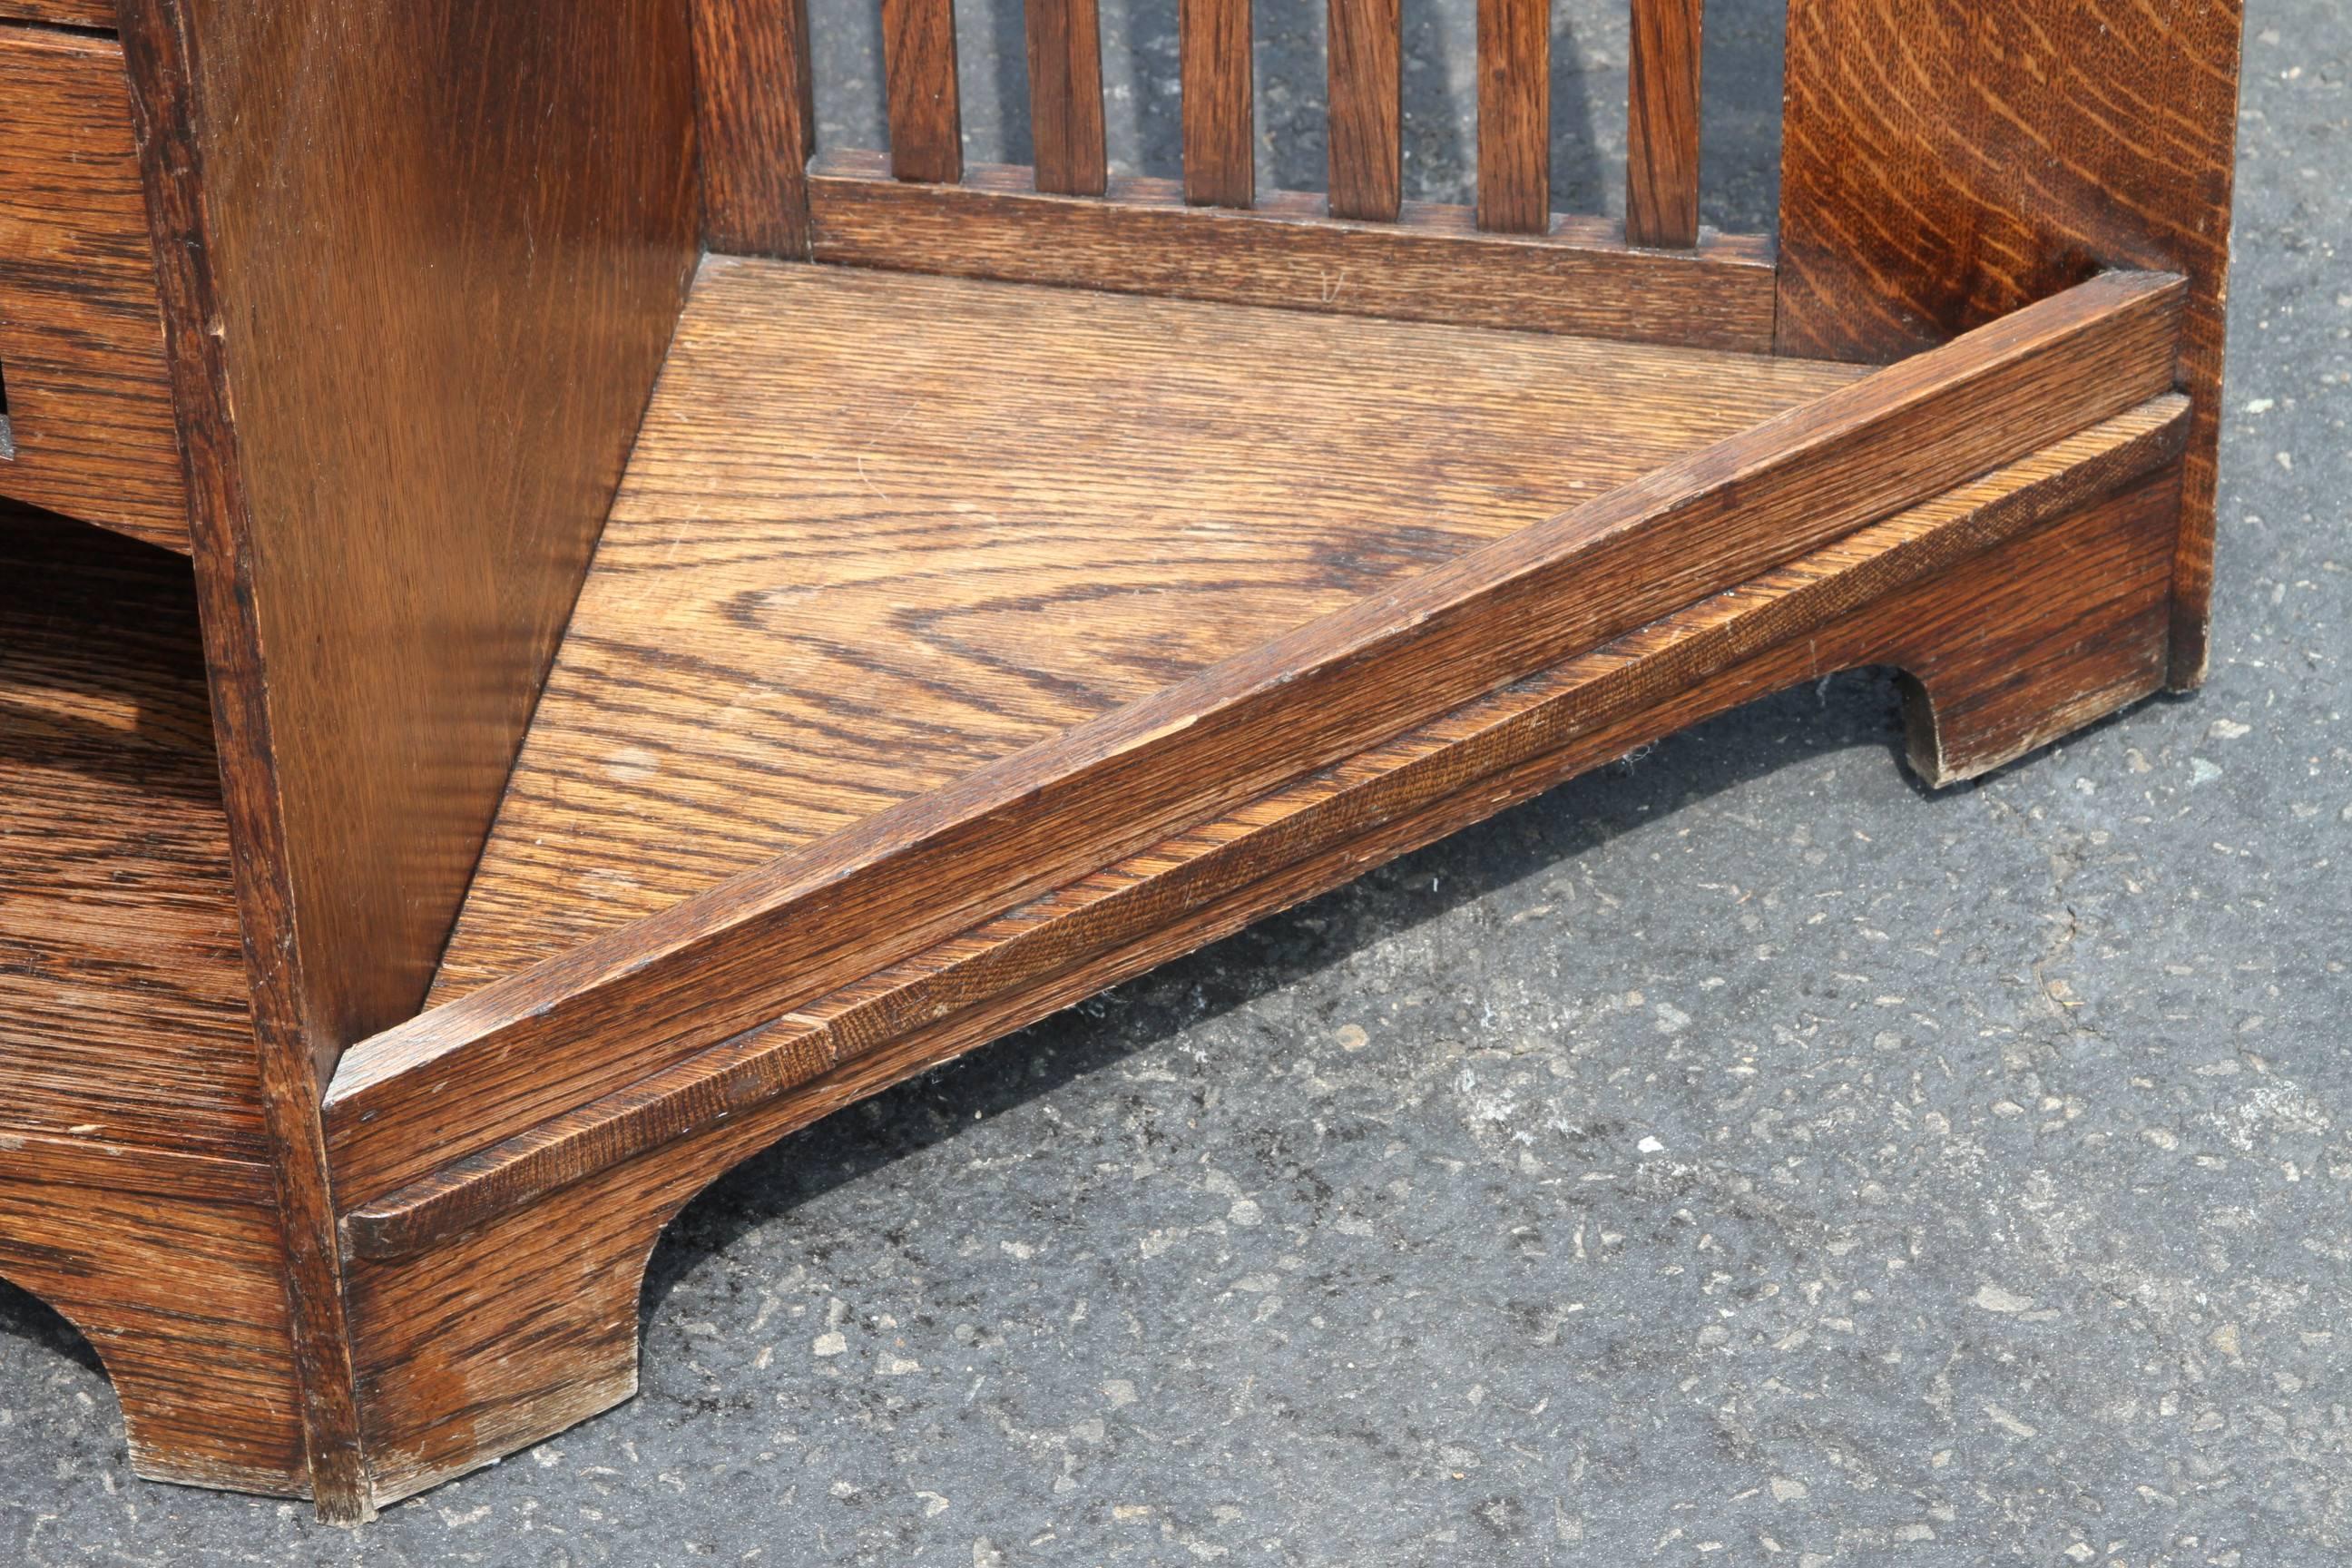 Hand-Crafted Barber Brothers Arts and Crafts Hall Bench, circa 1900-1910